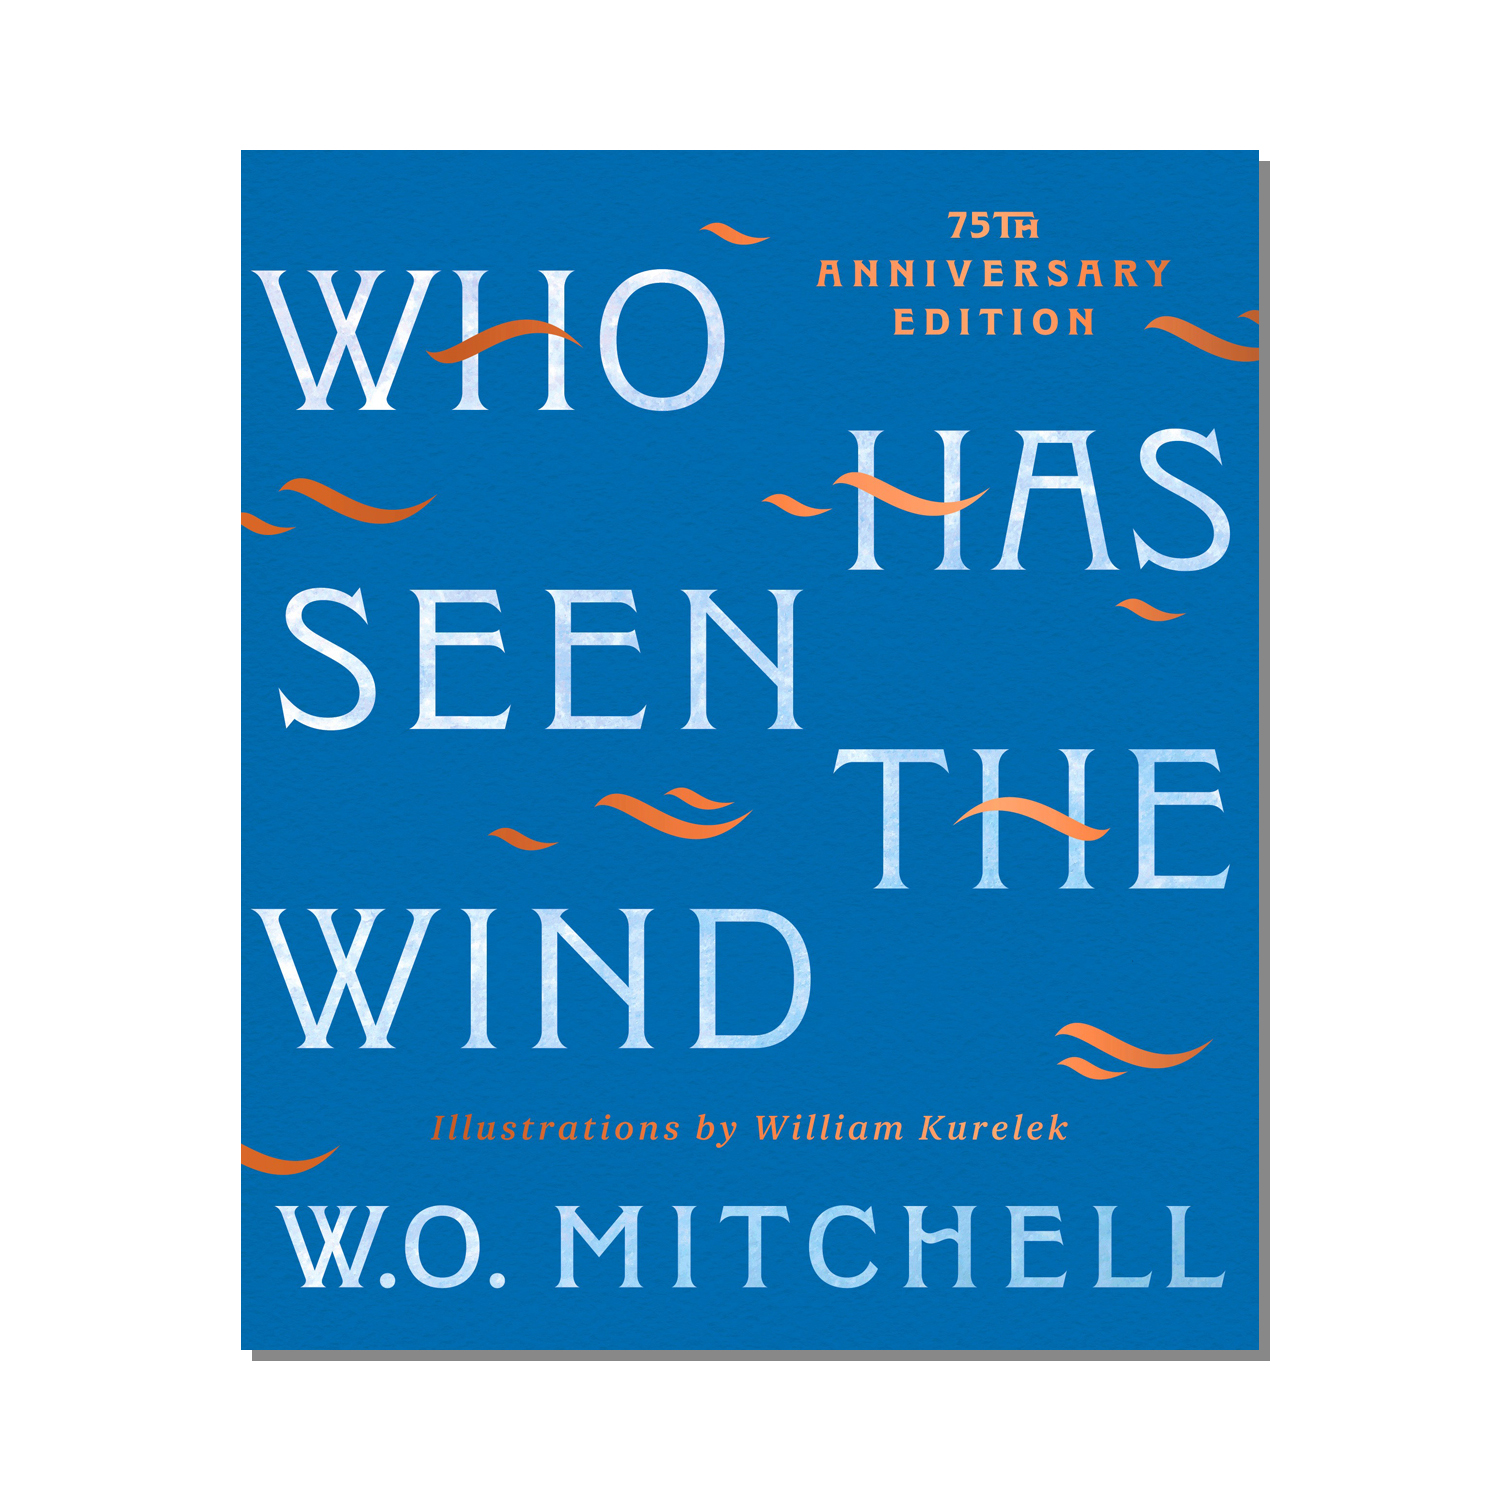 Book cover for Who Has Seen the Wind by W.O. Mitchell, with illustrations by William Kurelek; this is the 75th Anniversary Edition, published by Freehand Books in 2022.